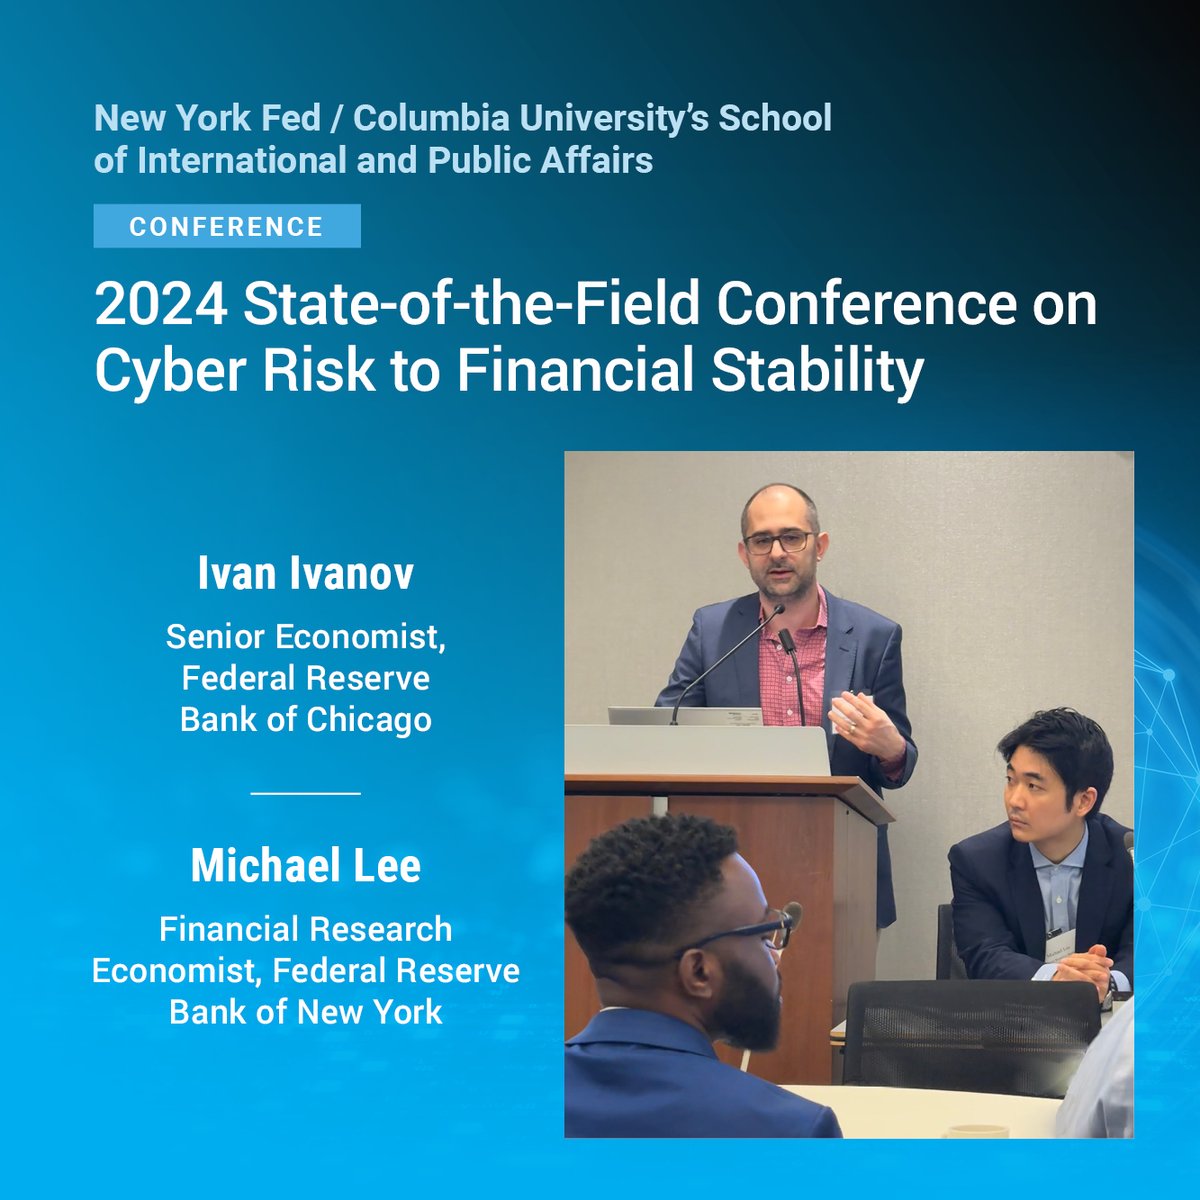 Ivan Ivanov (@ChicagoFed) shared new work documenting adverse capital market consequences for state and local governments due to data breaches. See “City Hall Has Been Hacked! The Financial Costs of Lax Cybersecurity” via link on our agenda page: nyfed.org/4aysWXS